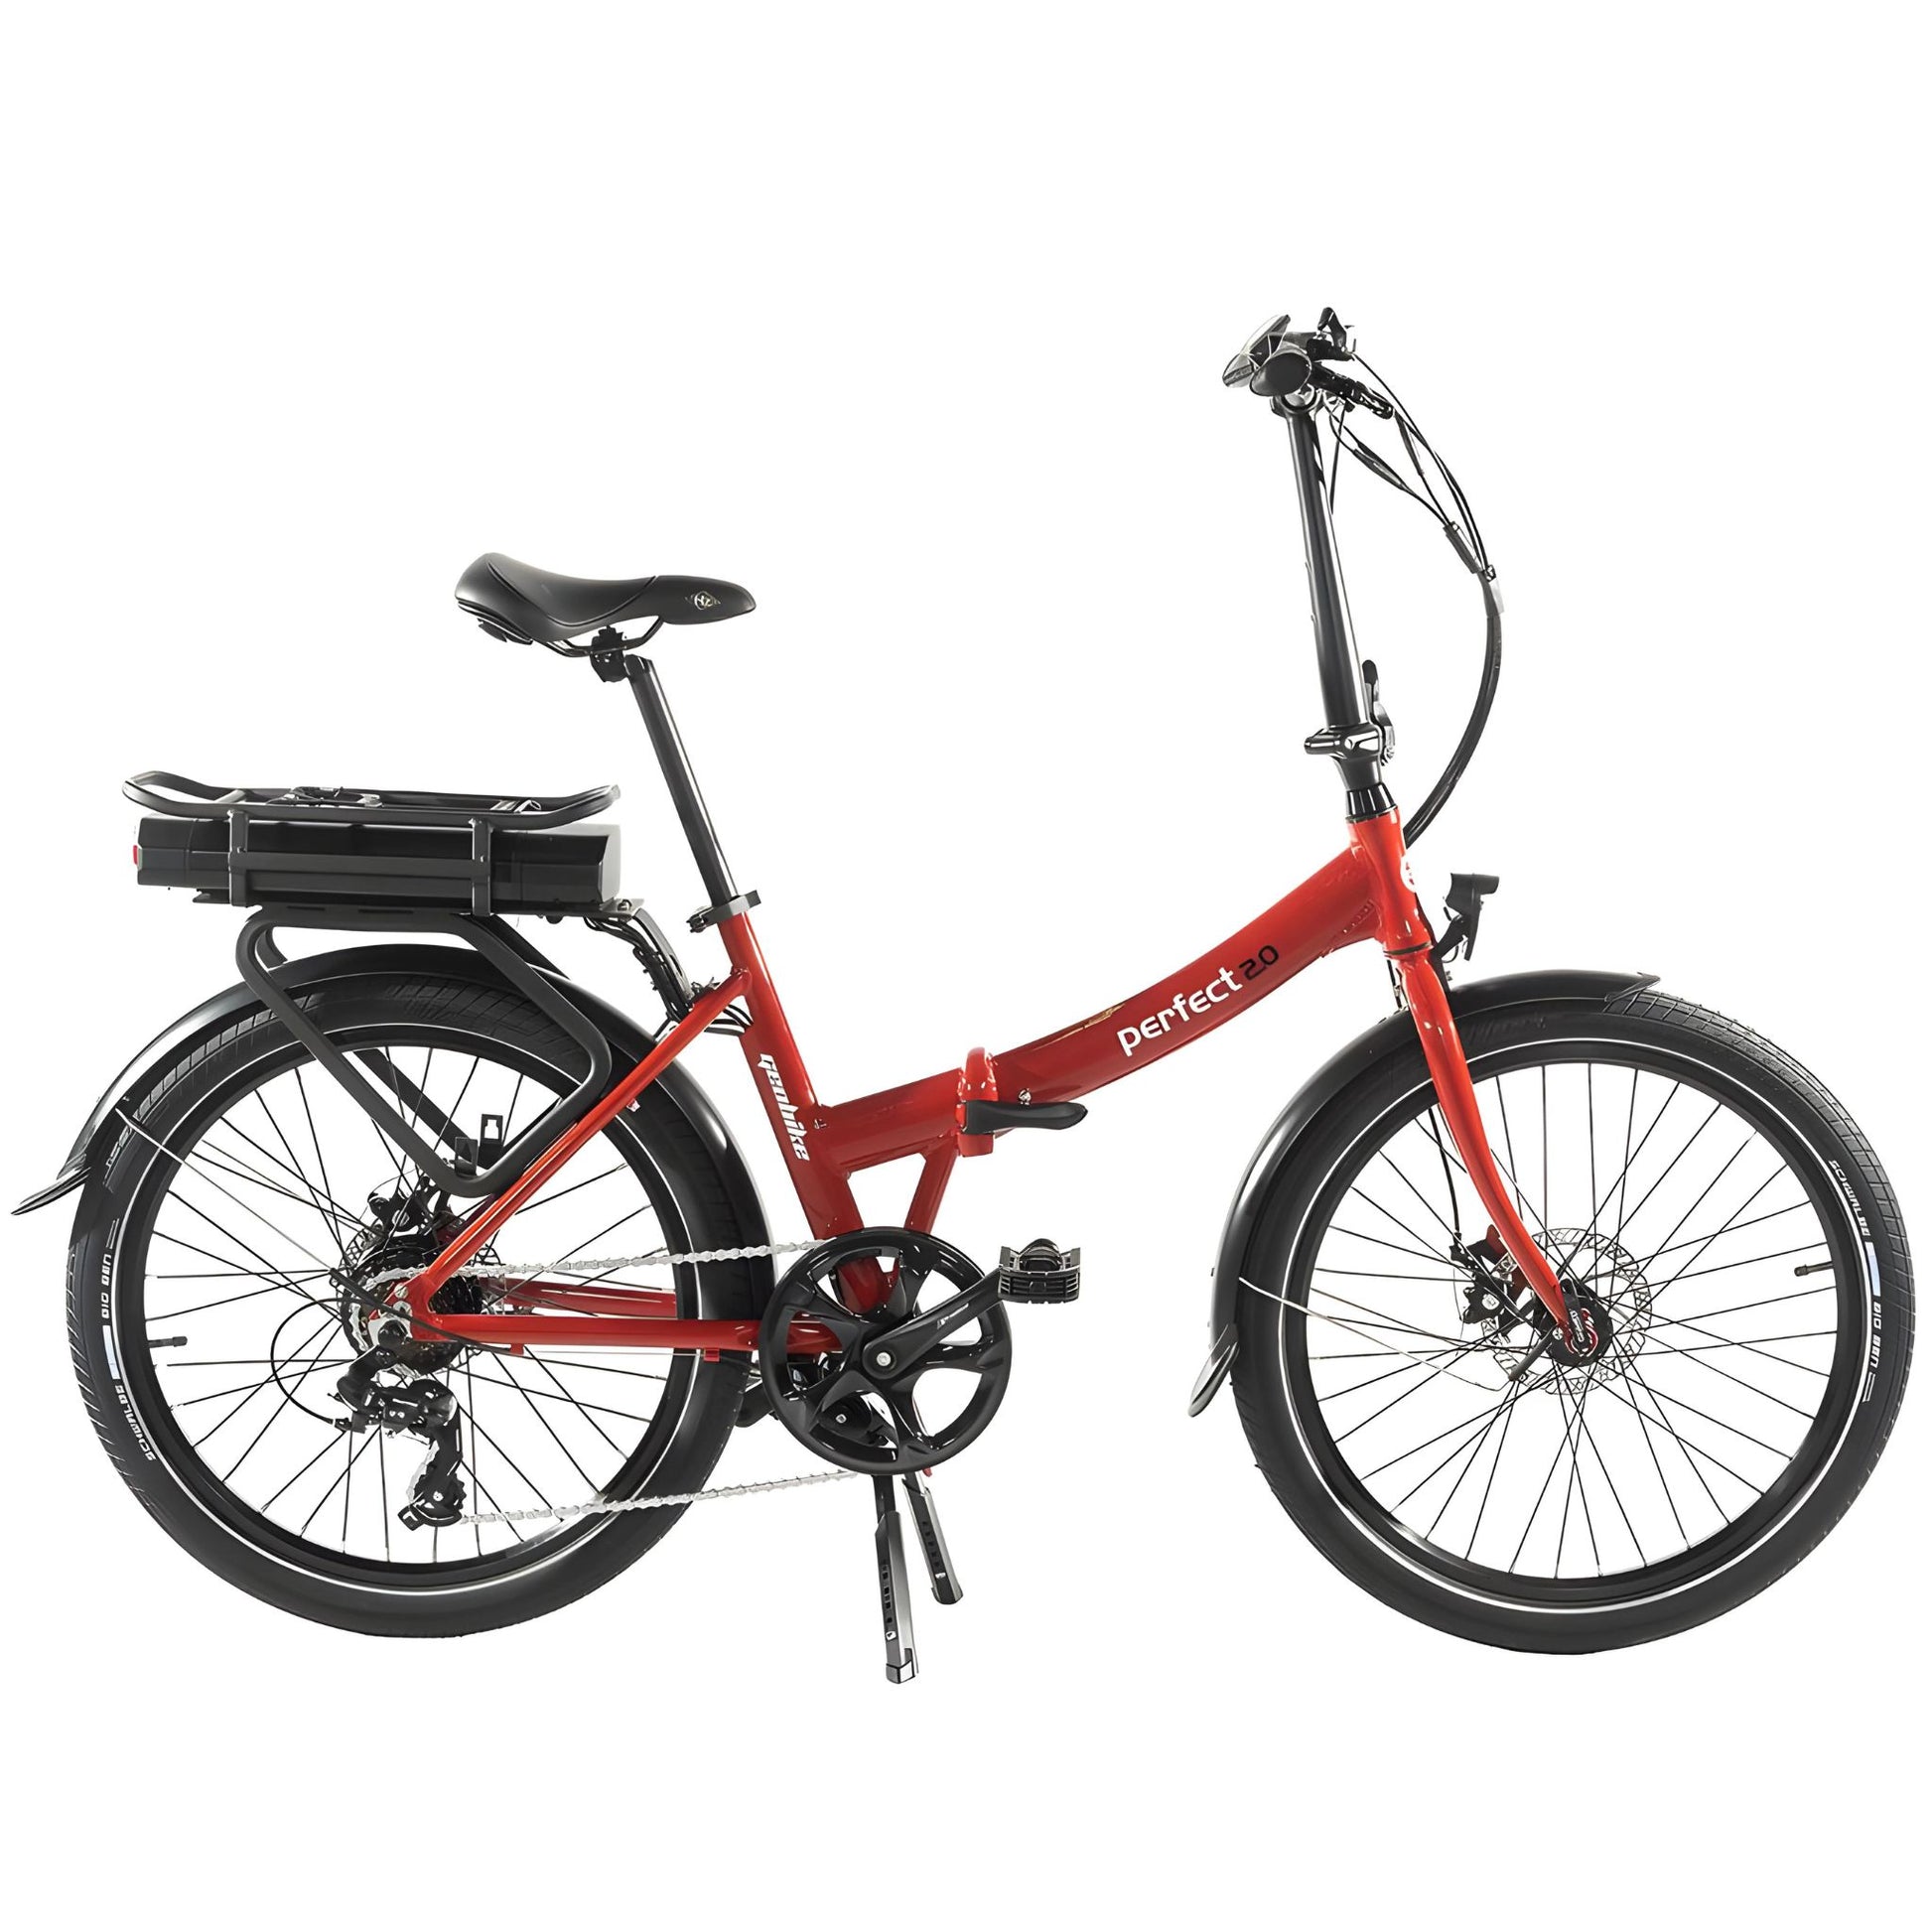 Red Geobike Perfect 2.0 ready for riding with folded frame